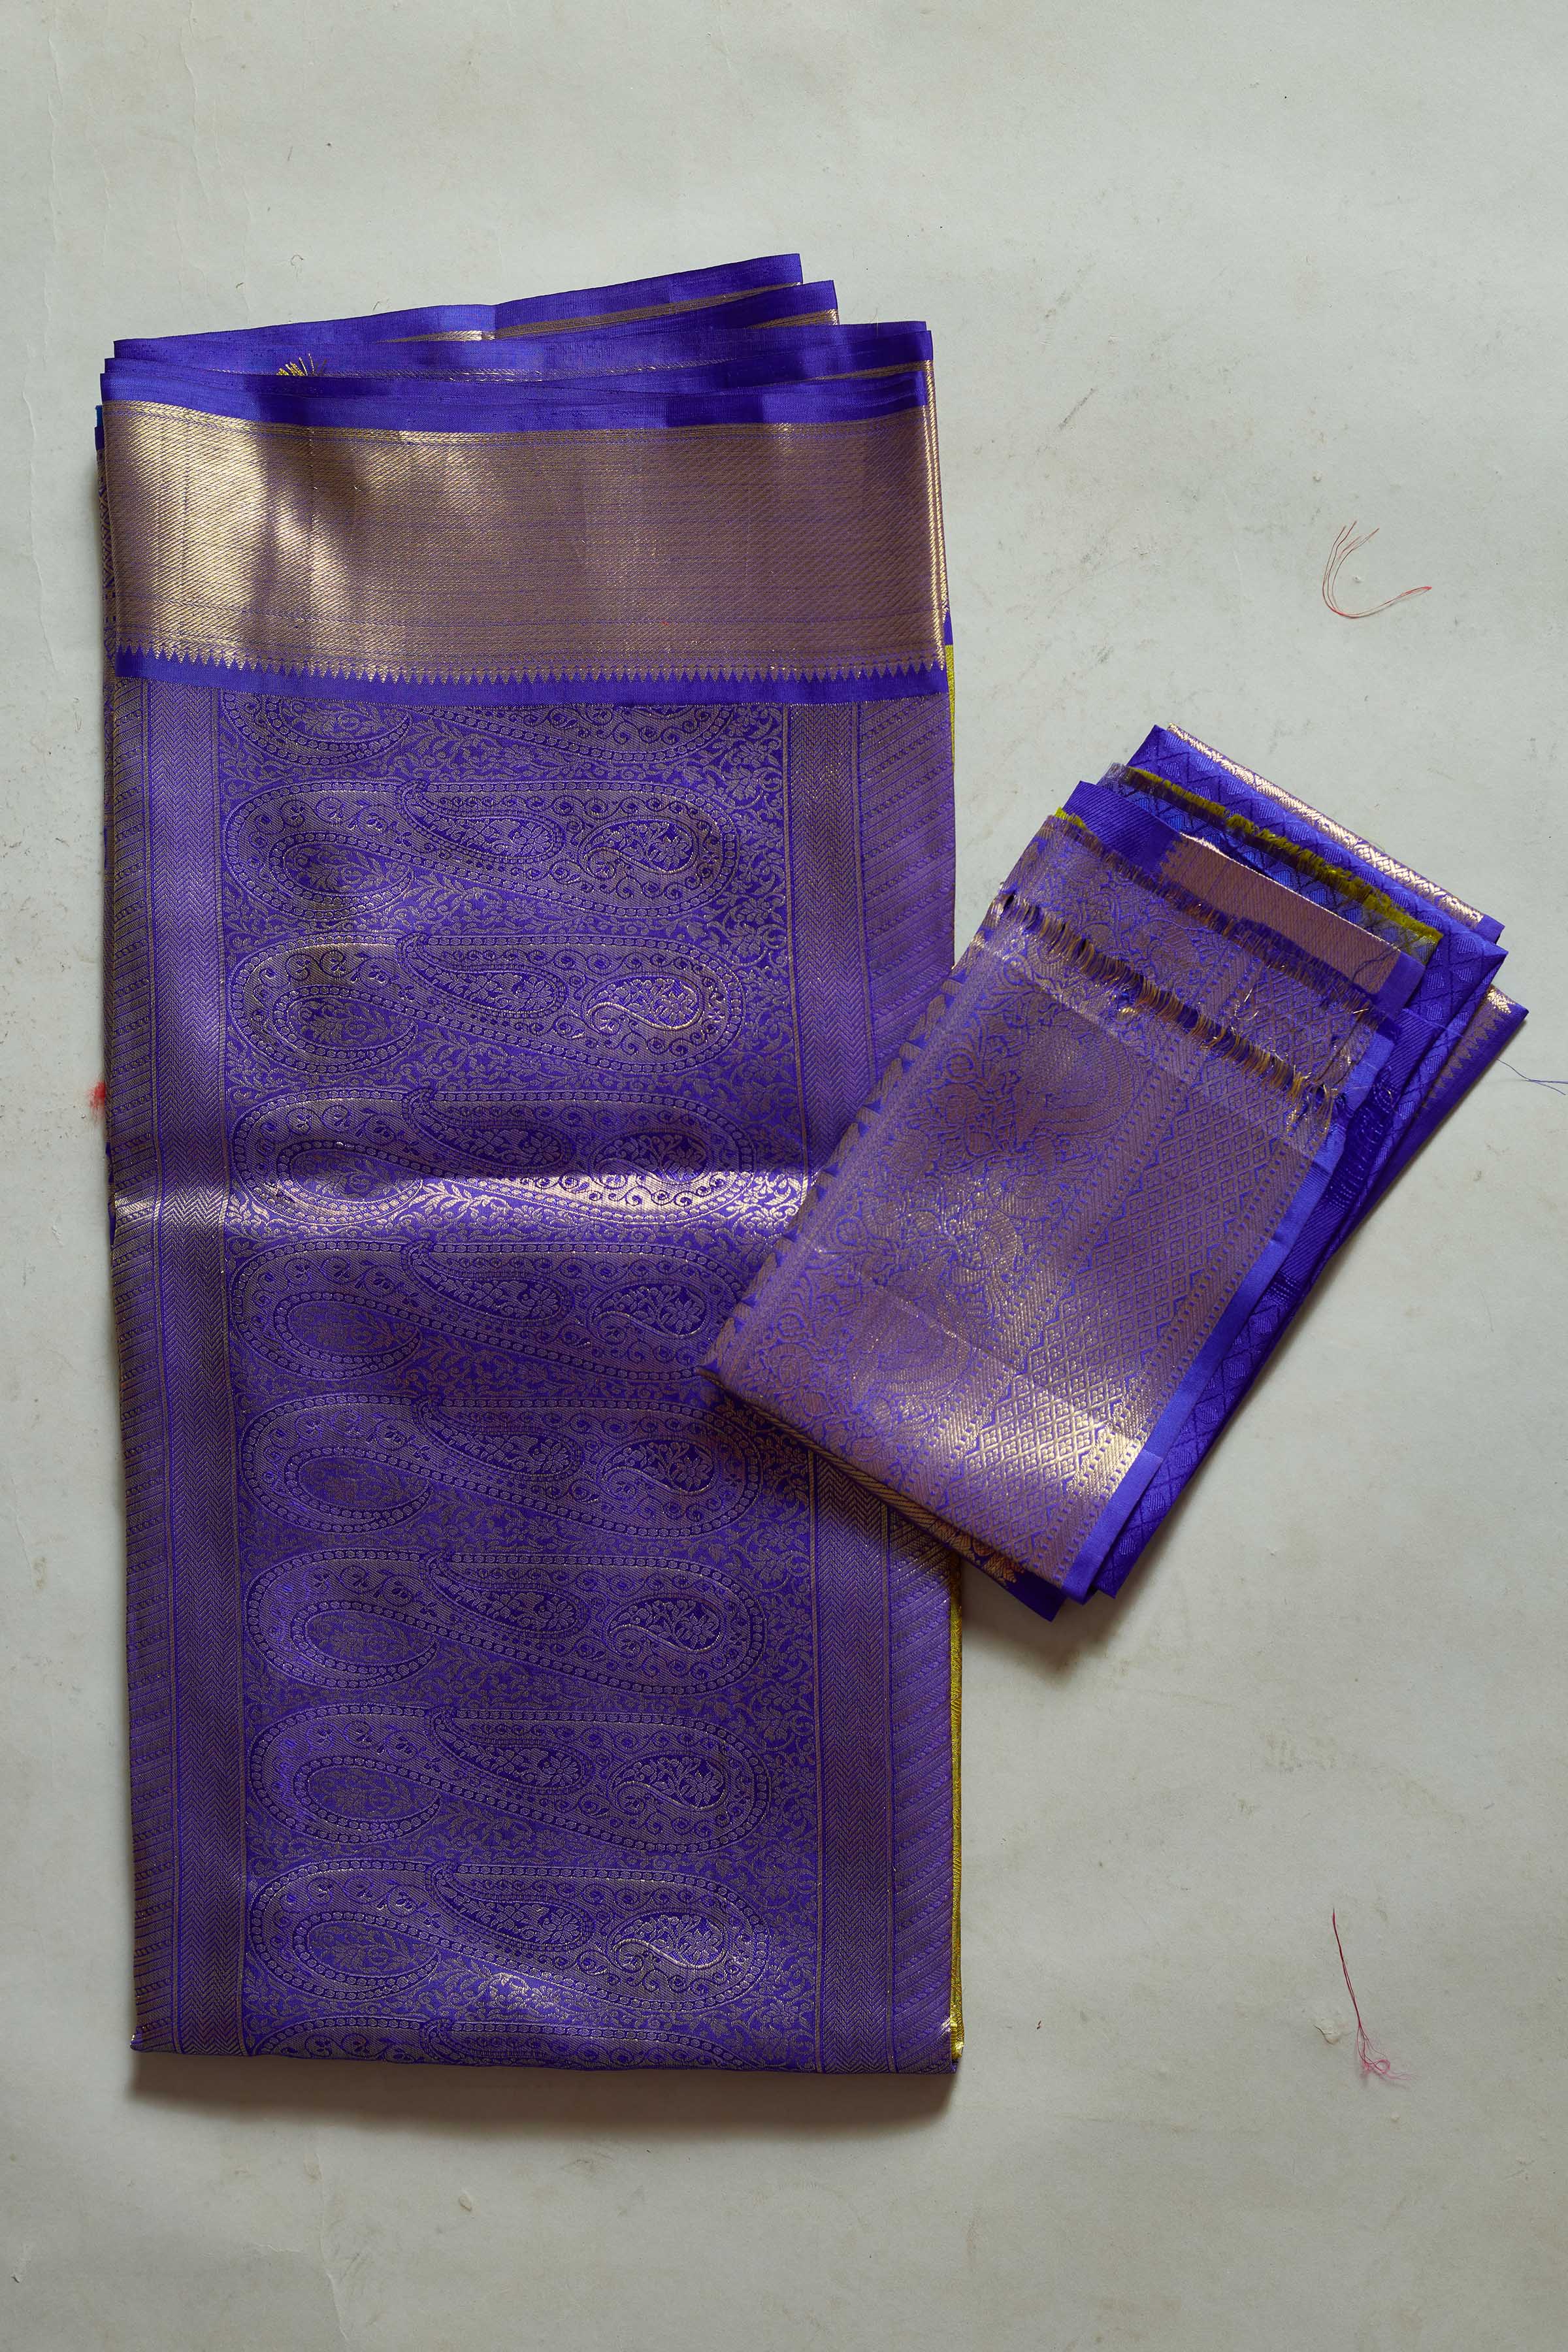 Shop pista  green Kanjivaram silk sari online in USA with purple border. Look your best on festive occasions in latest designer sarees, pure silk sarees, Kanjivaram silk saris, handwoven saris, tussar silk sarees, embroidered saris from Pure Elegance Indian clothing store in USA.-blouse